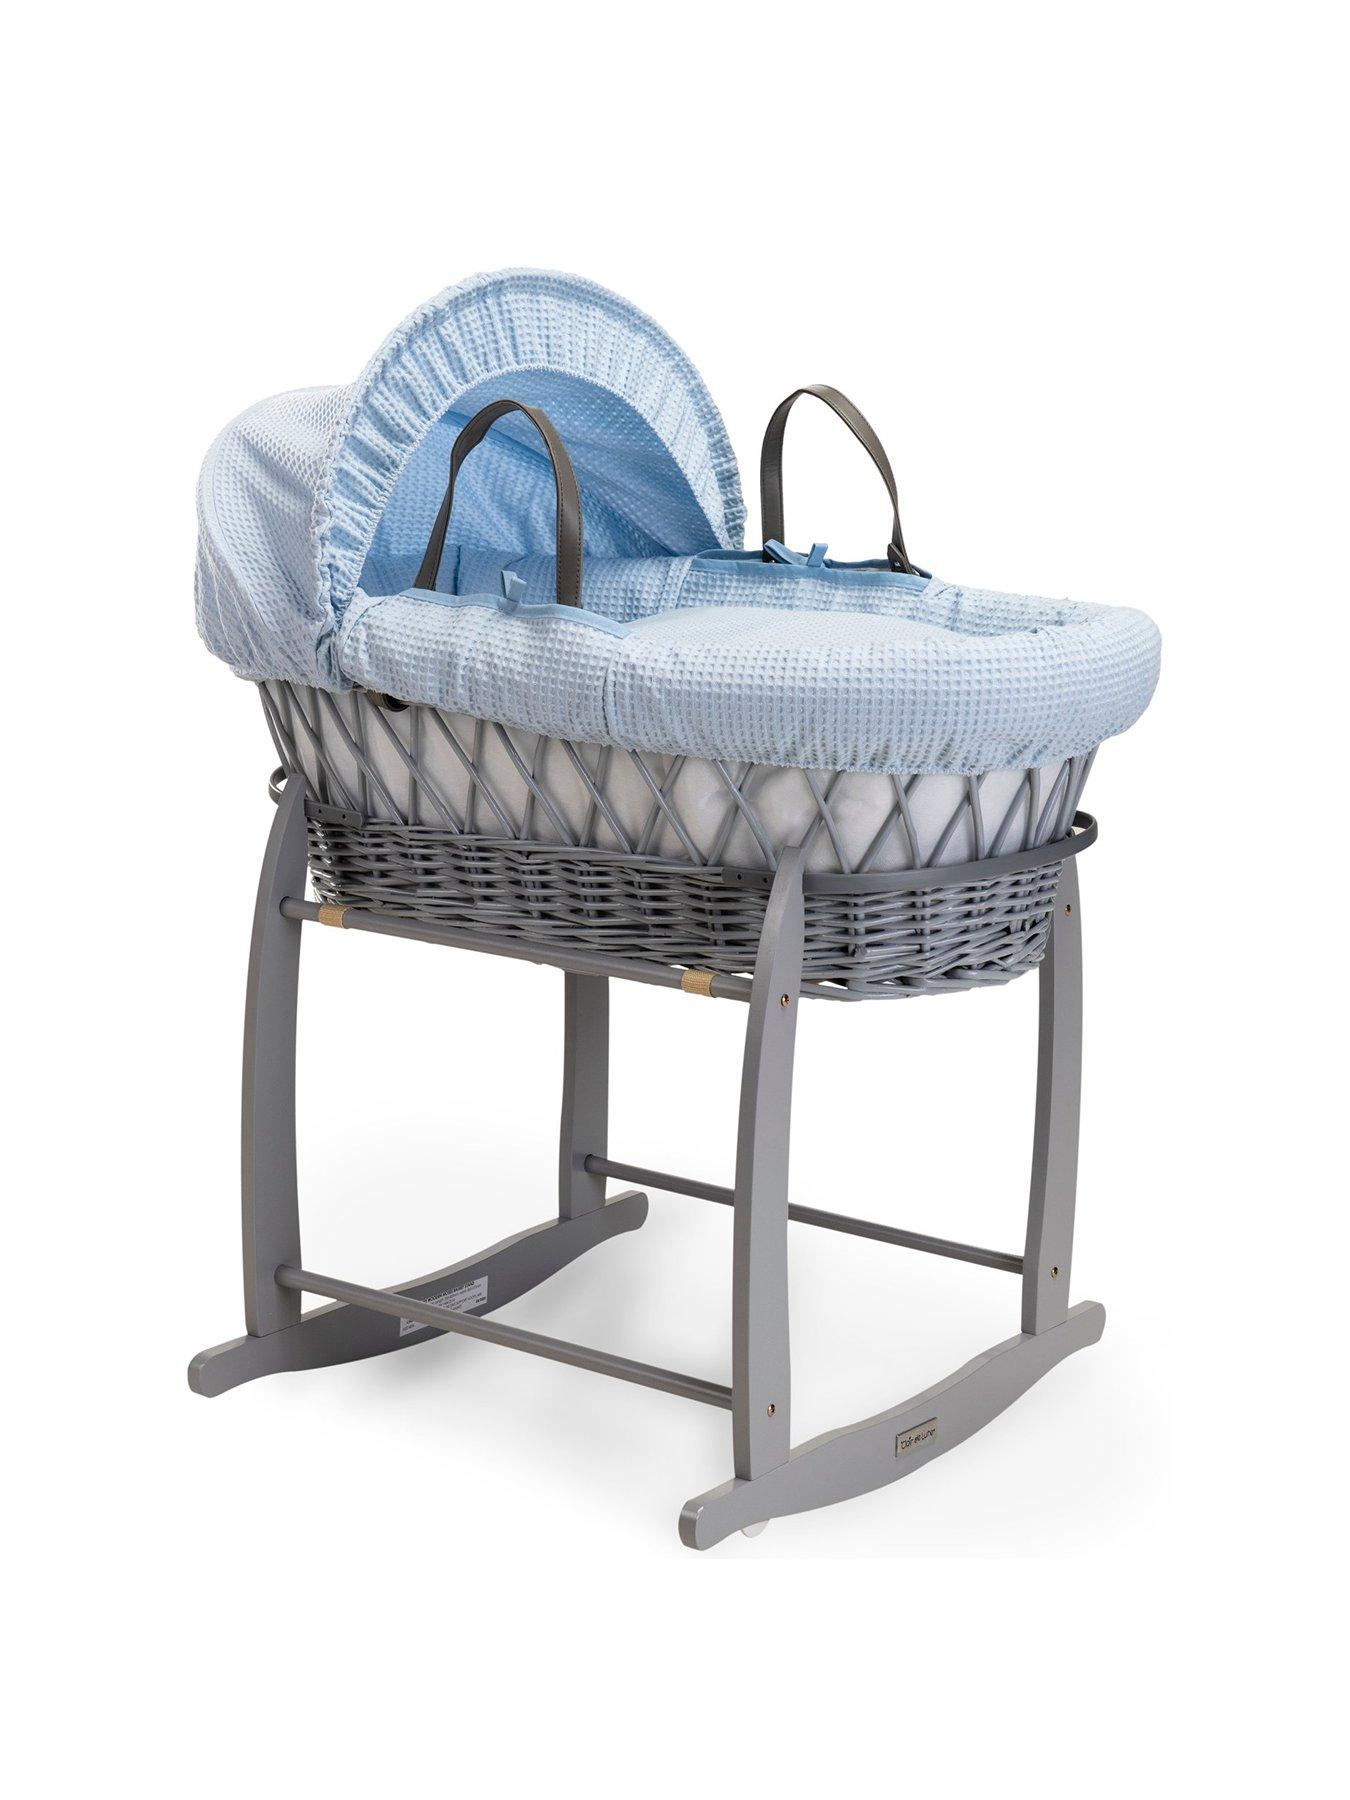 Adjustable Hood How Many Sheep Palm Moses Basket with Folding Stand Natural Fibre Mattress & Padded Liner 